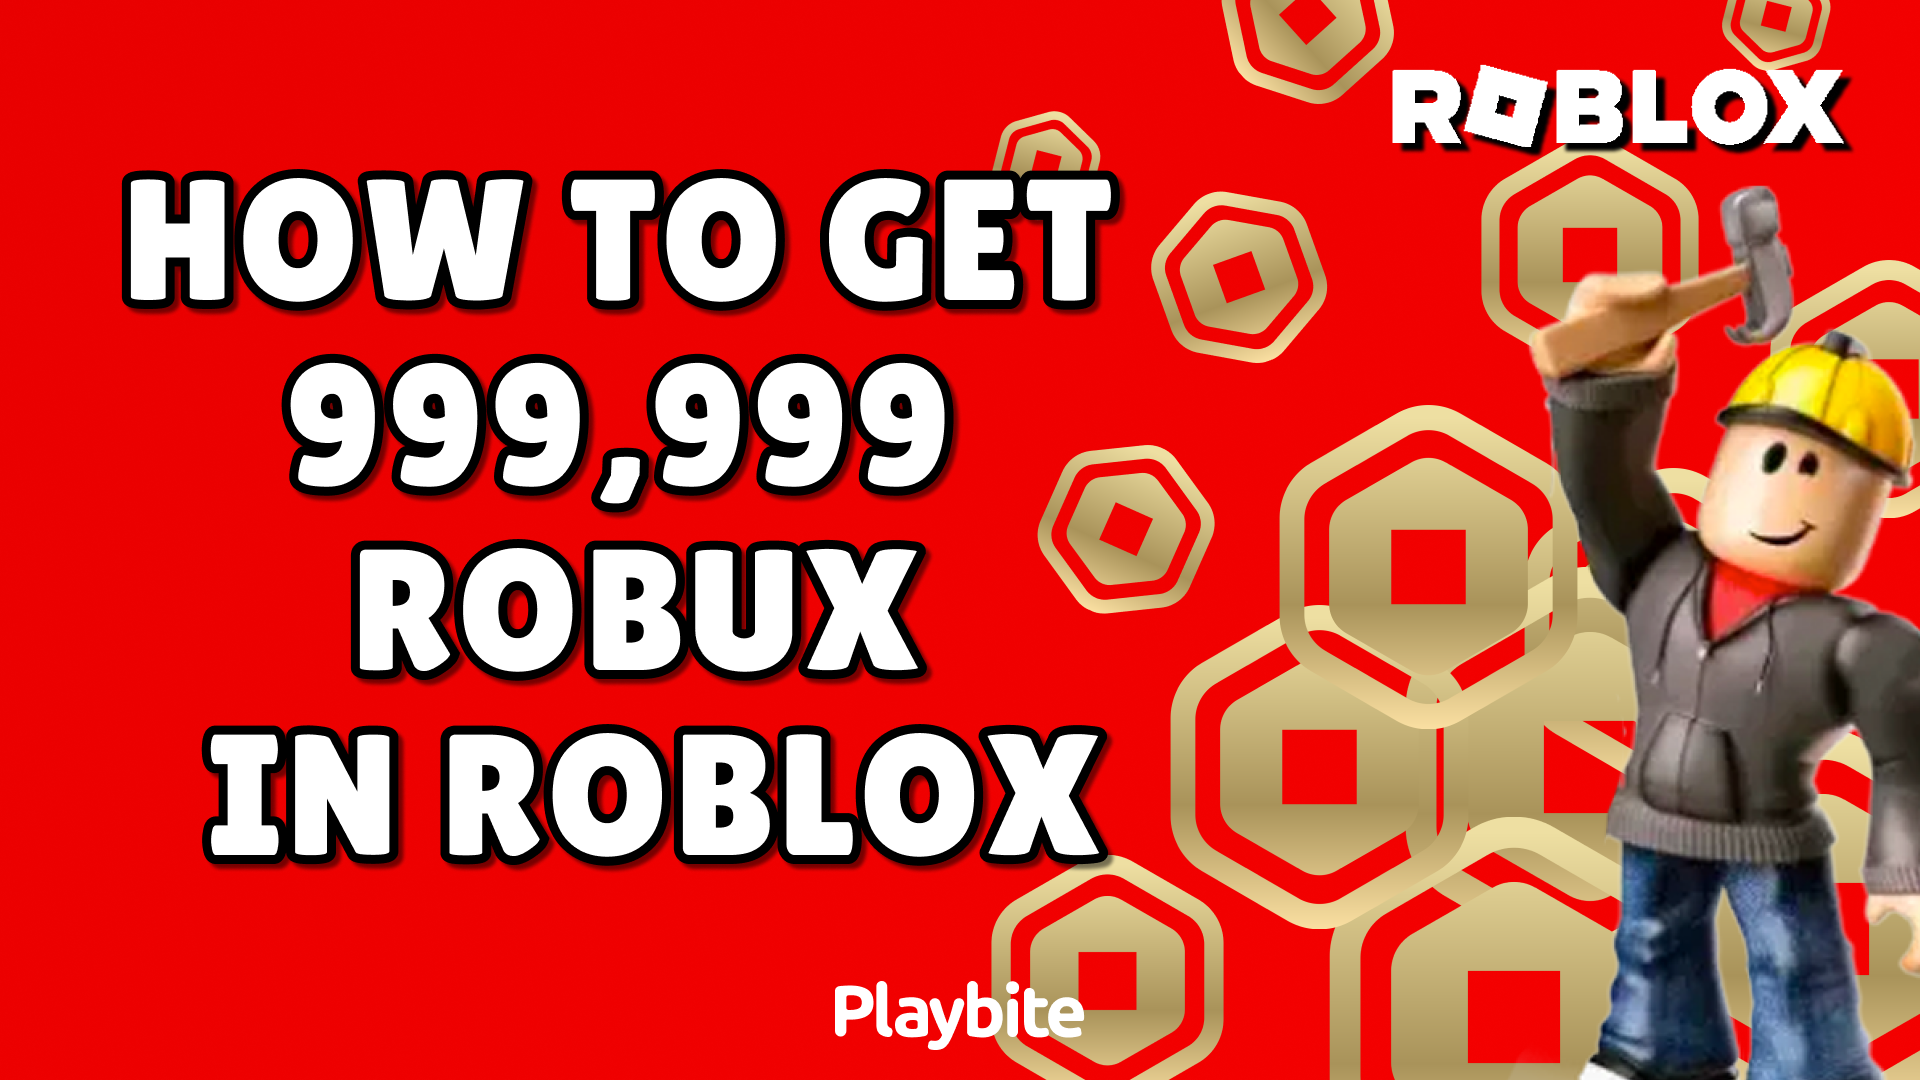 How to Get 999999 Robux in Roblox?